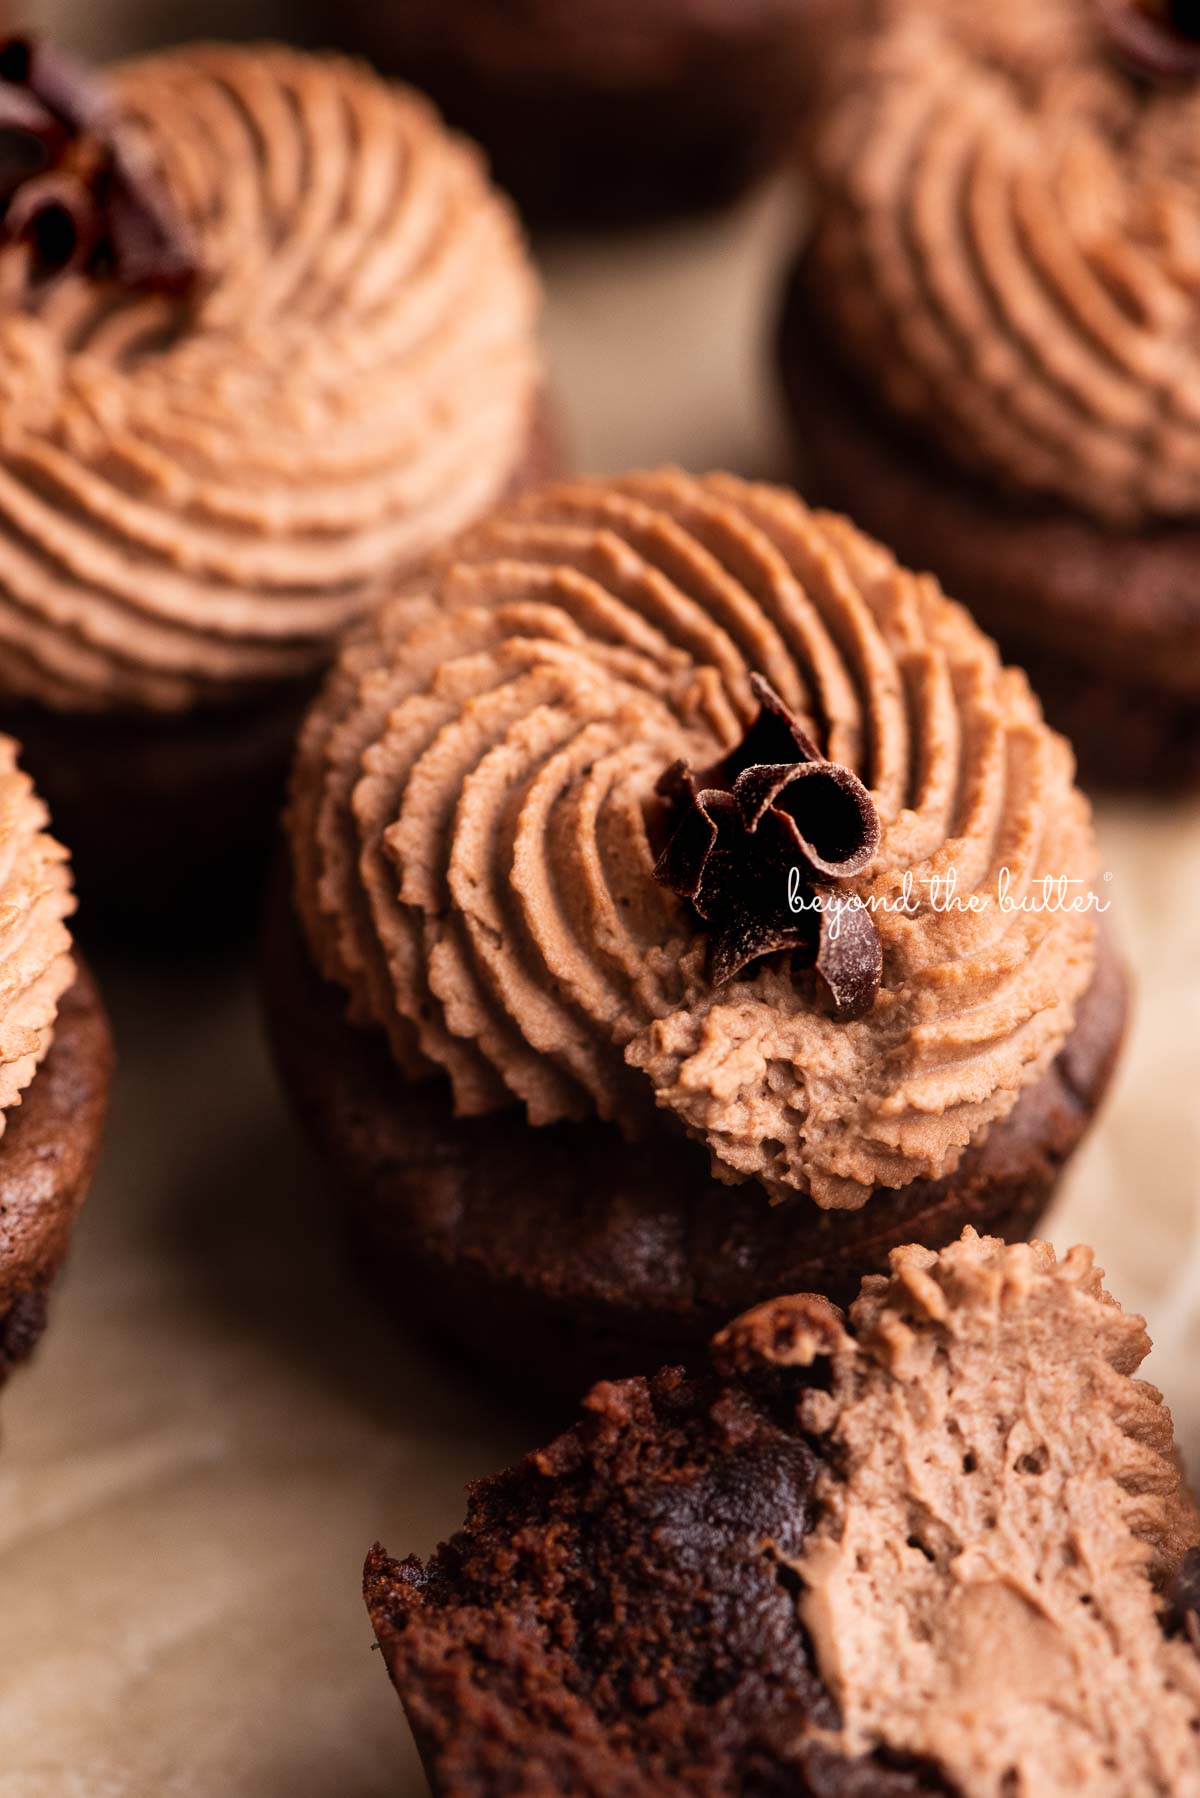 Chewy brownie bites on natural parchment paper with one half eaten brownie bite in the center | © Beyond the Butter®